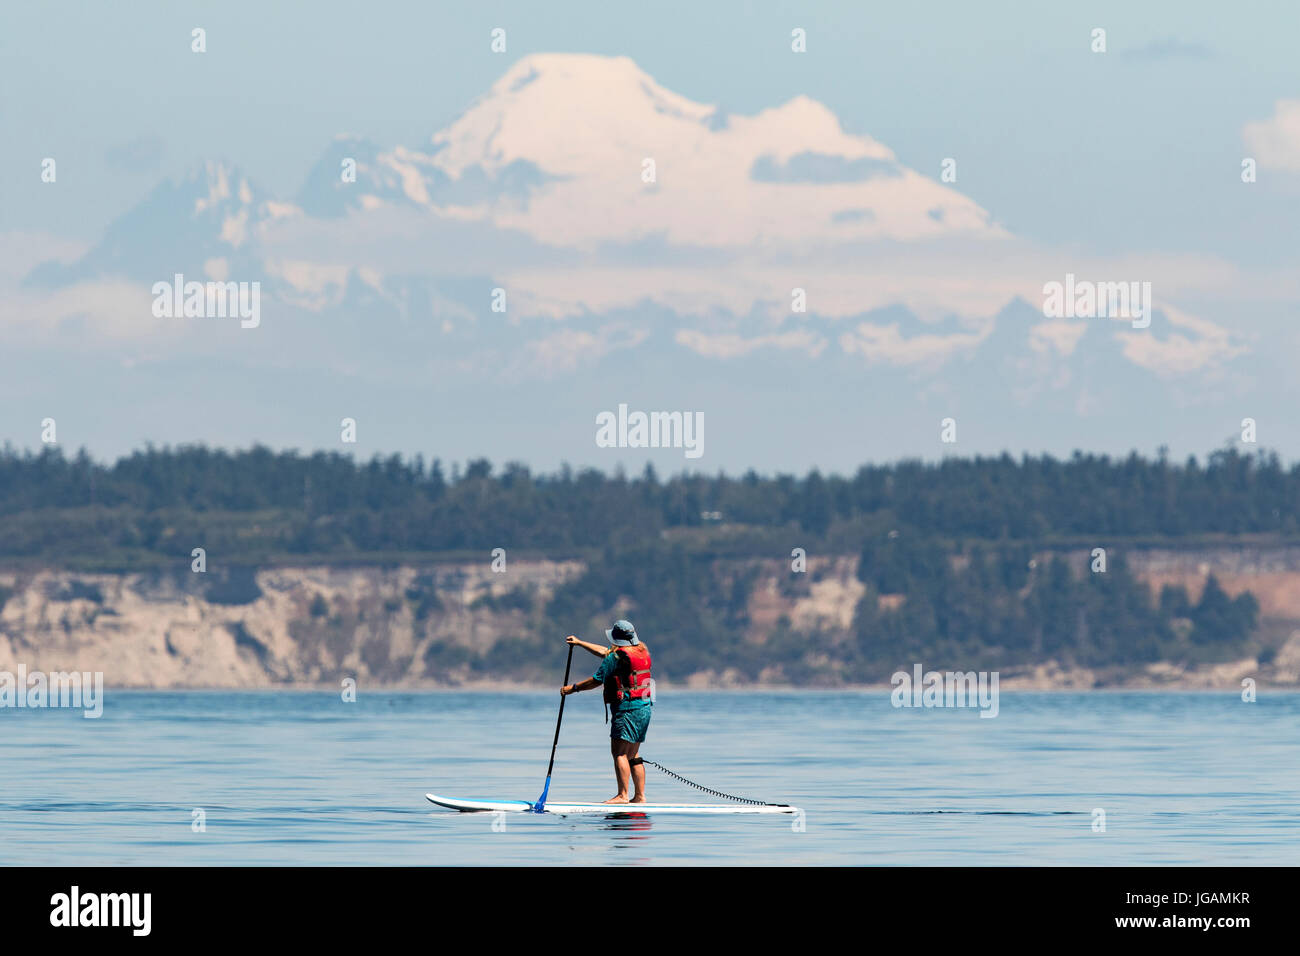 Stand up paddle boarding on Puget Sound with Mount Baker in background. Stock Photo